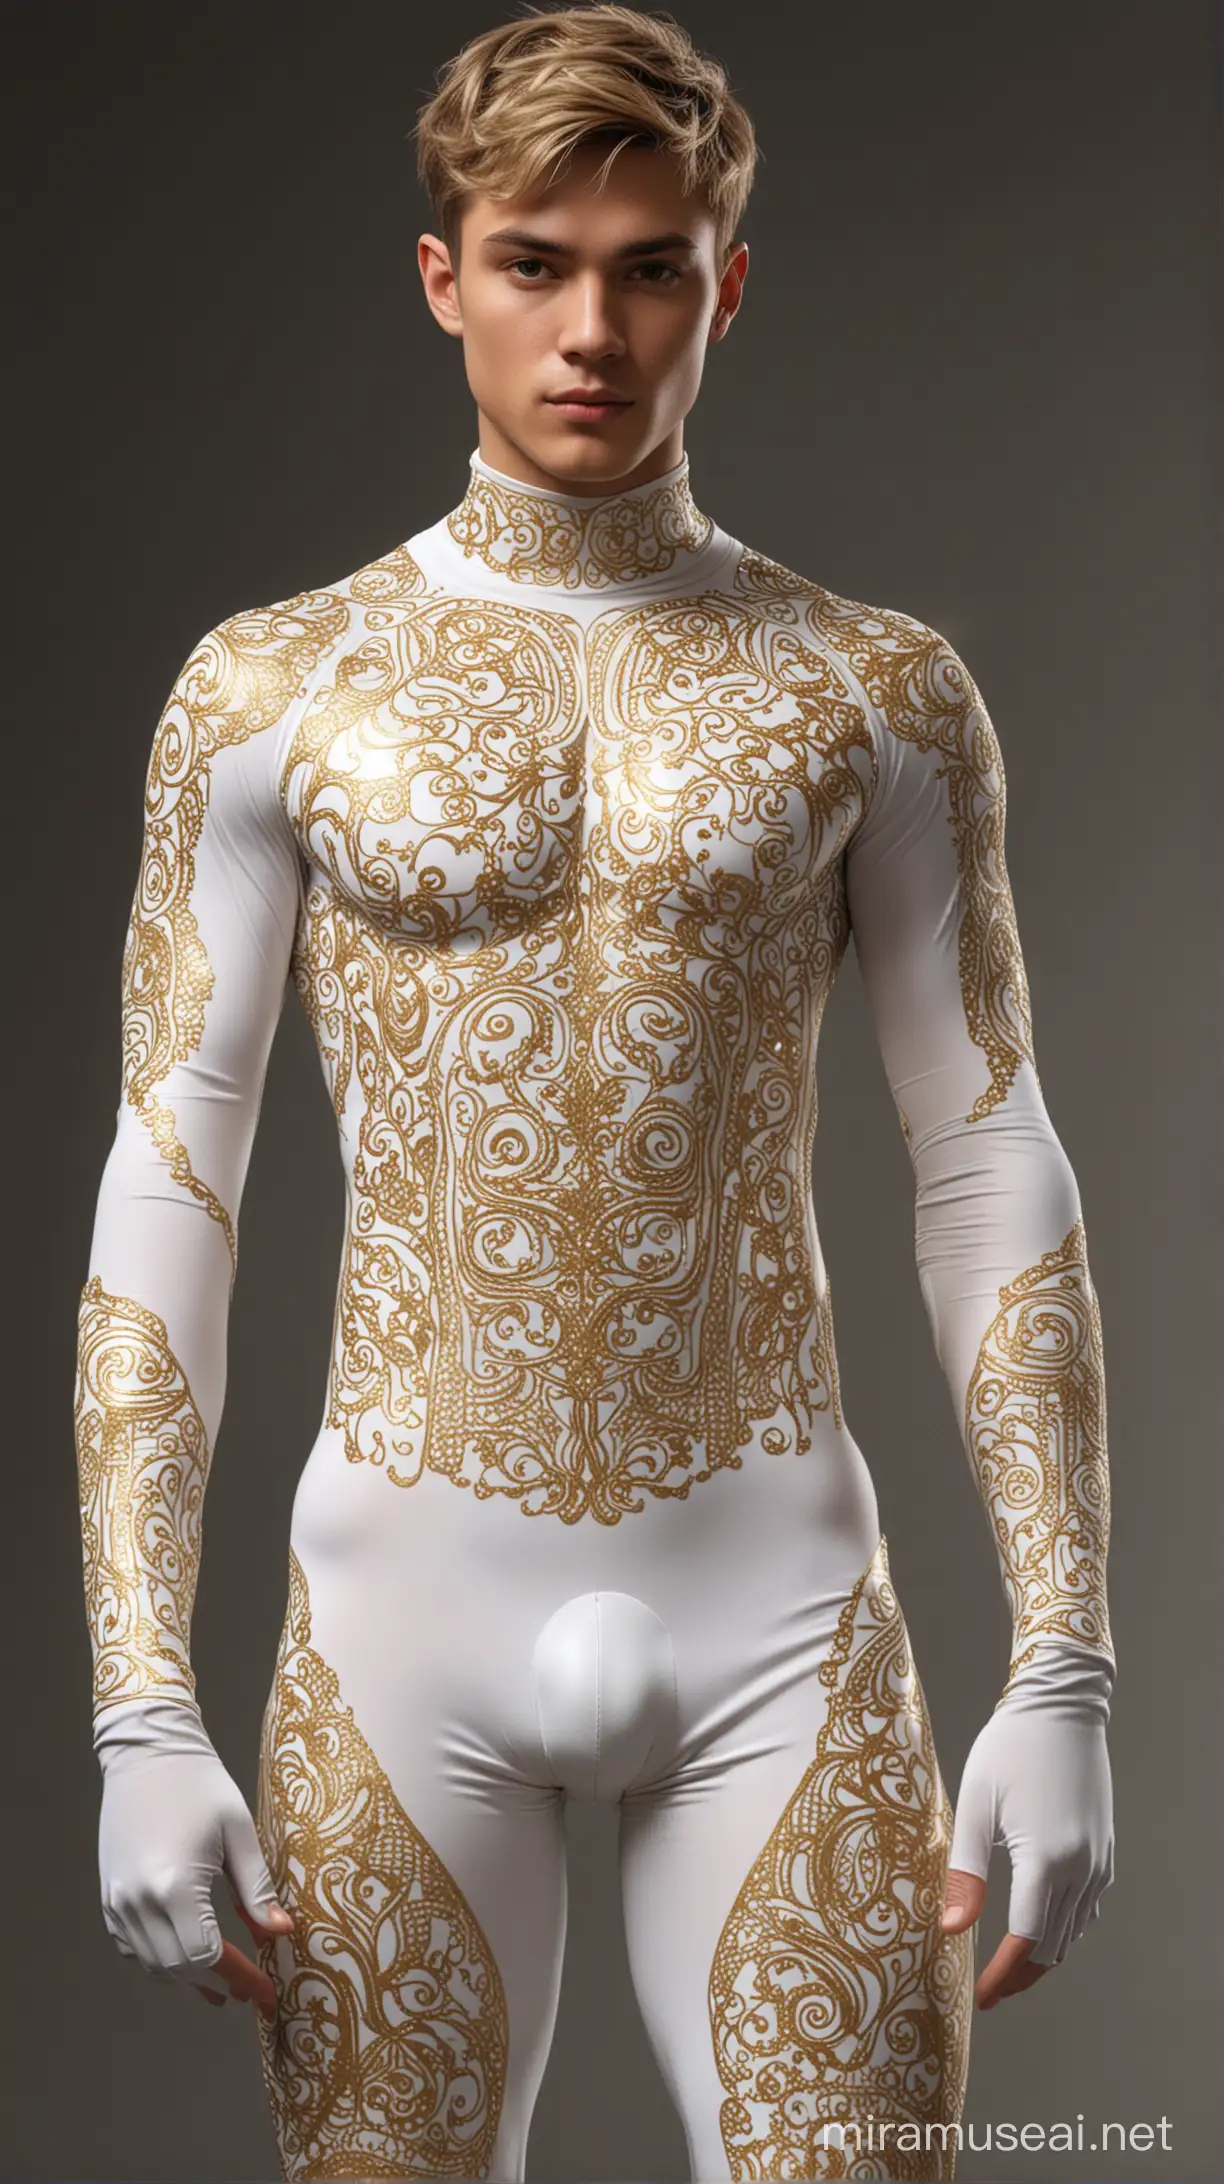  Full full body photorealistic ultra realism high definition aesthetic stabilized diffusion picture of very handsome 18 yo hunky fractal clean shaven  Zayne as celestial Teng, wearing white and gold waves filigree sparkling biomorphic transparent overall tight fit spandex and gloves., standing firmly,, face and body frontal camera focus. hand on the hips.